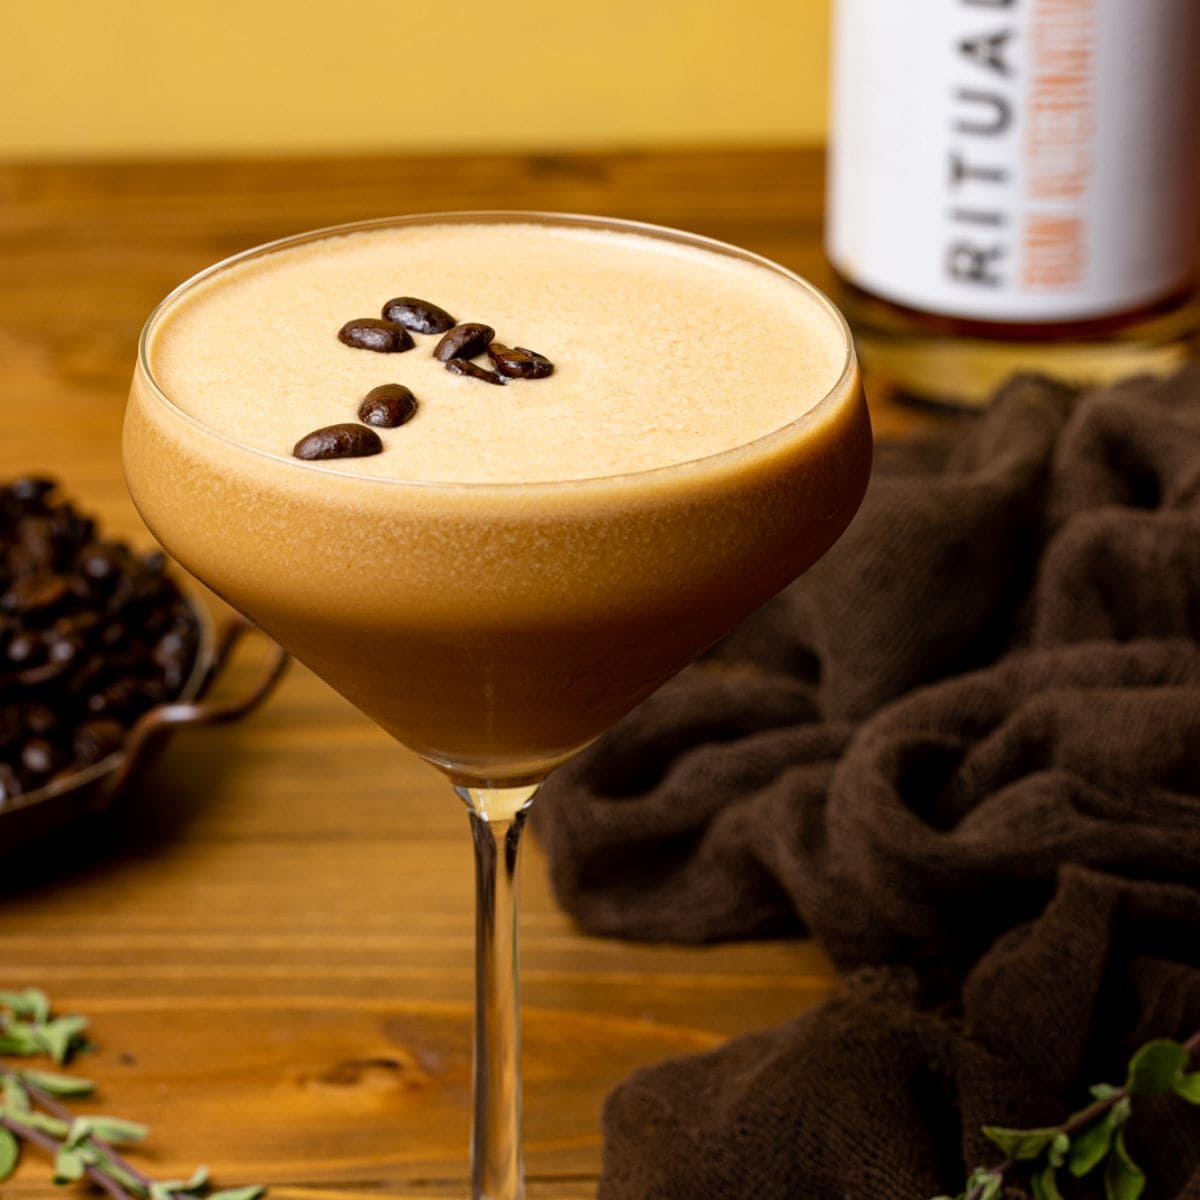 Espresso martini in a glass on a brown wood table with a brown napkin, coffee beans, and Rum alternative.